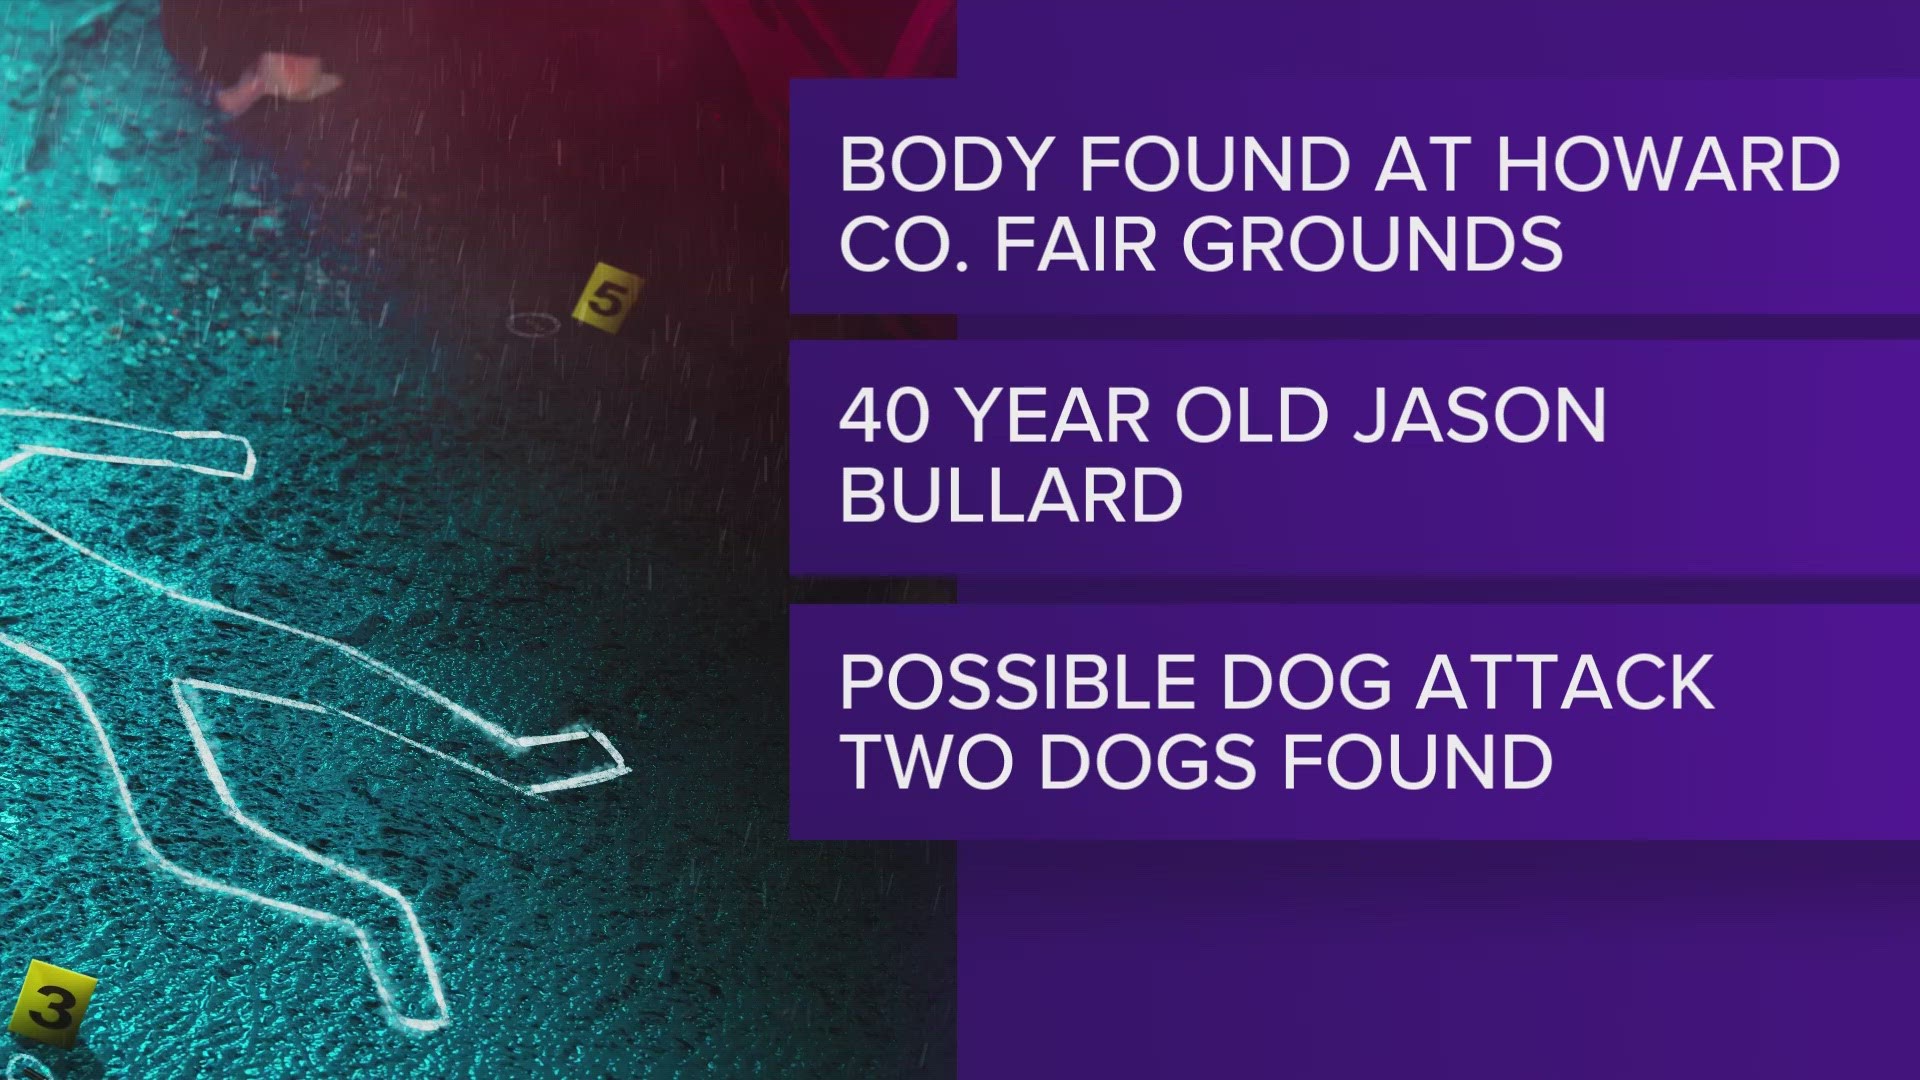 A deceased man was found Tuesday morning in the 2900 block of Old Hwy 80. BSPD have not released the cause of death but there is evidence of animal predation.